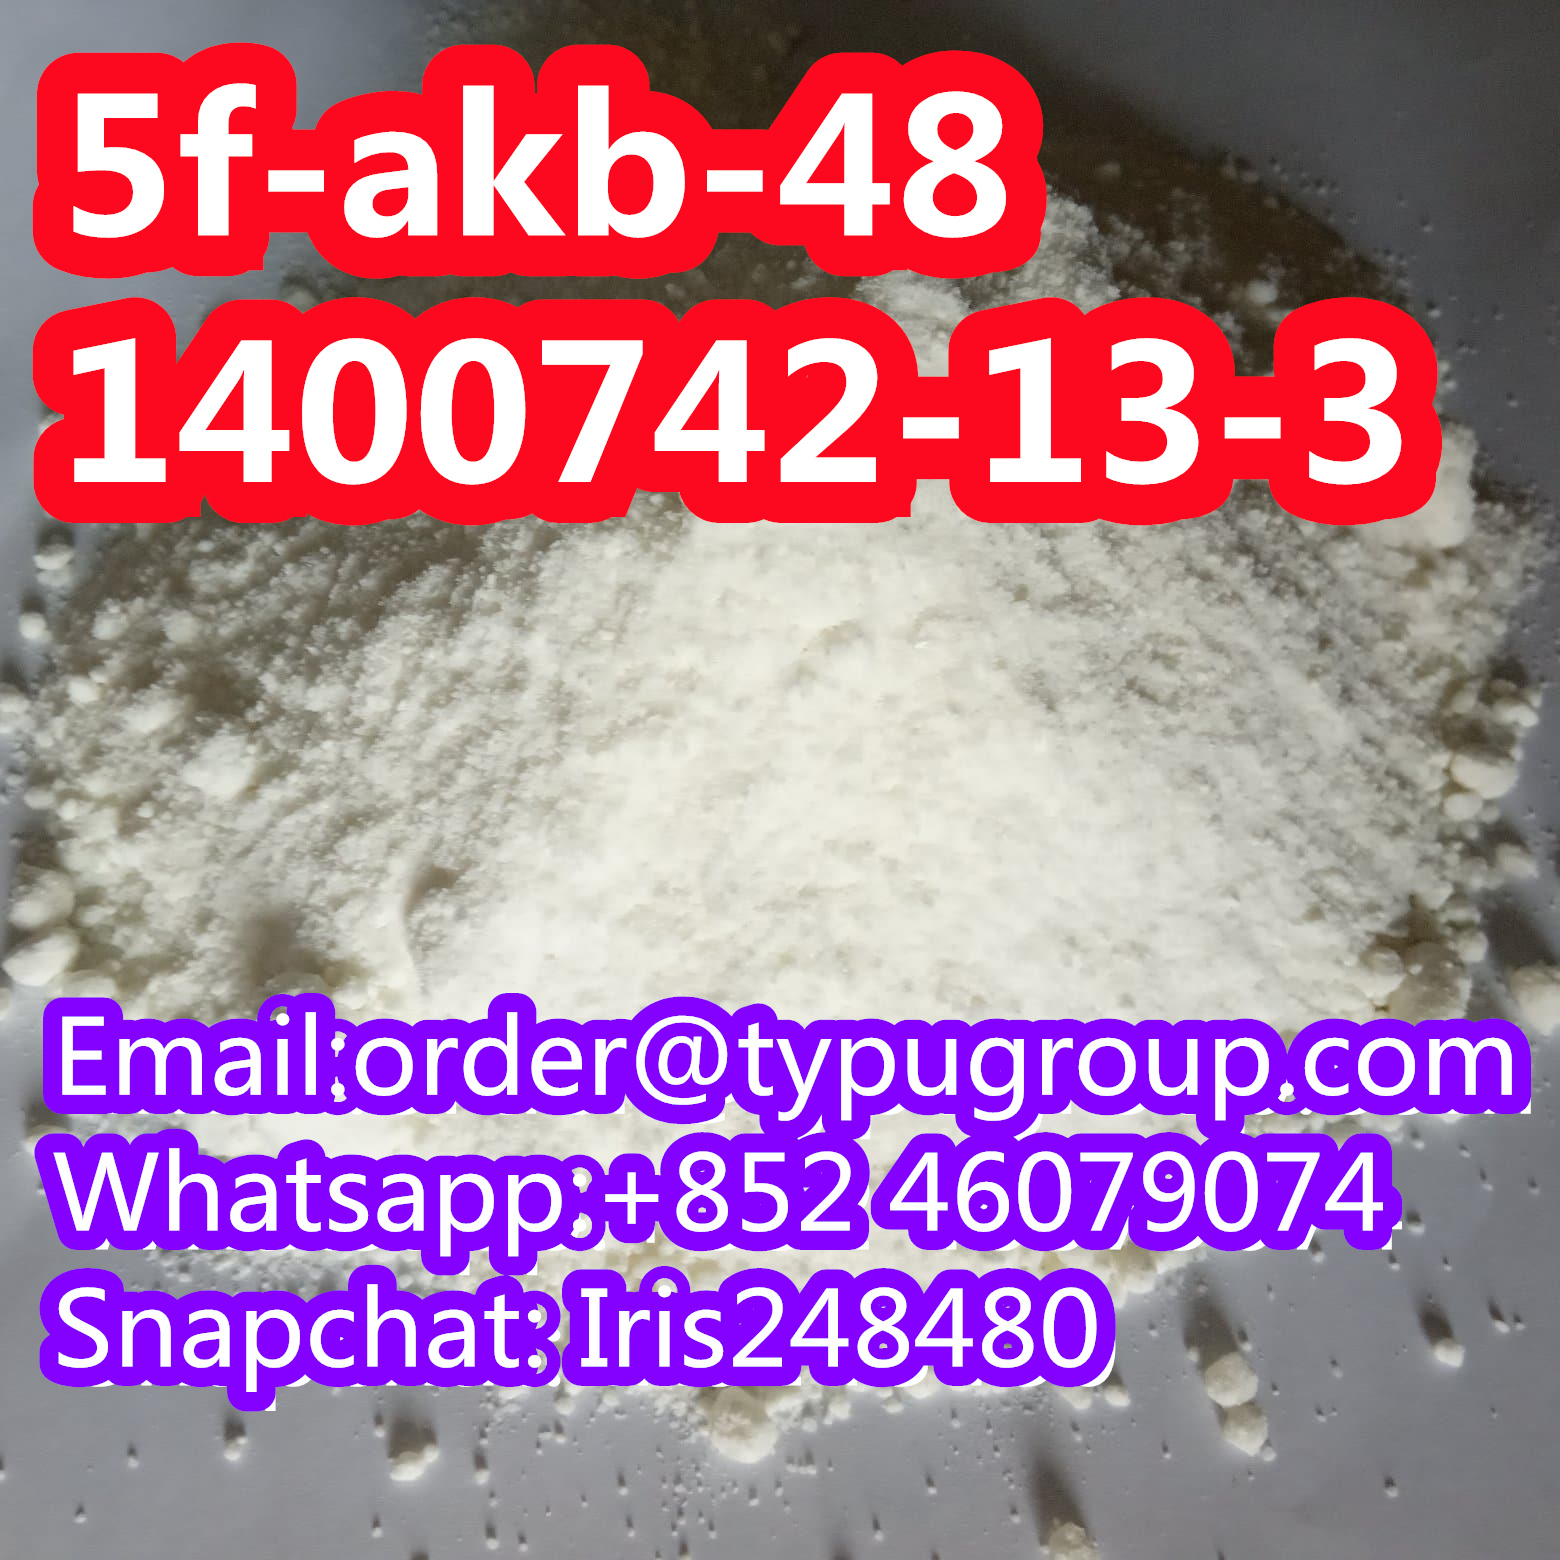 Supply best quality  5f-akb-48 cas 1400742-13-3 with good price Whatsapp:+852 46079074  - photo